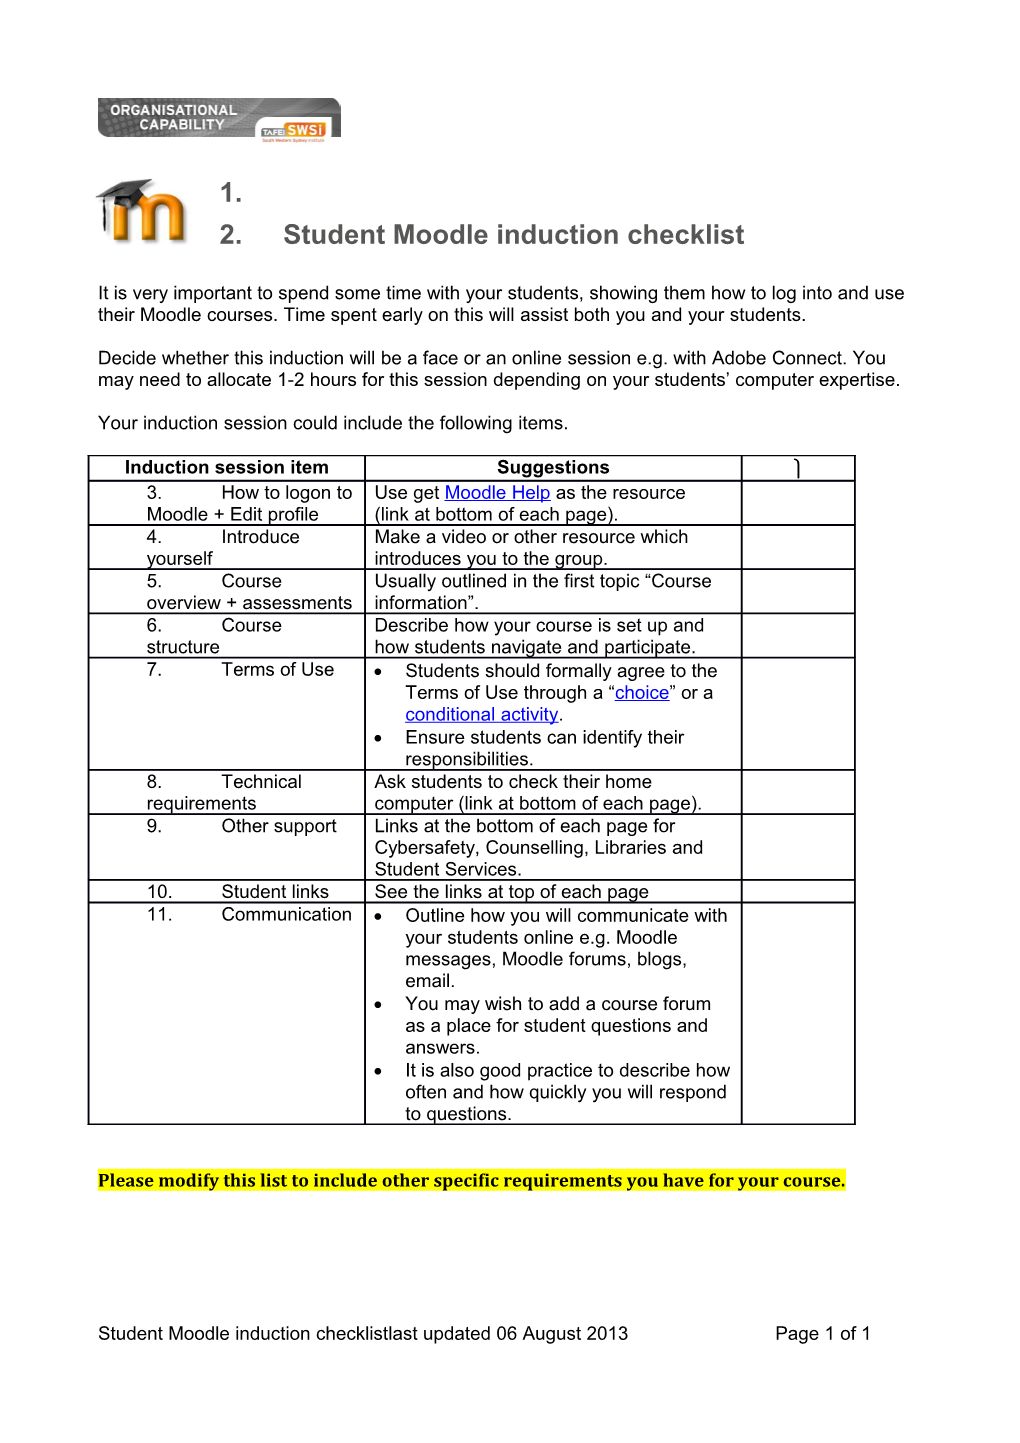 Student Moodle Induction Checklist